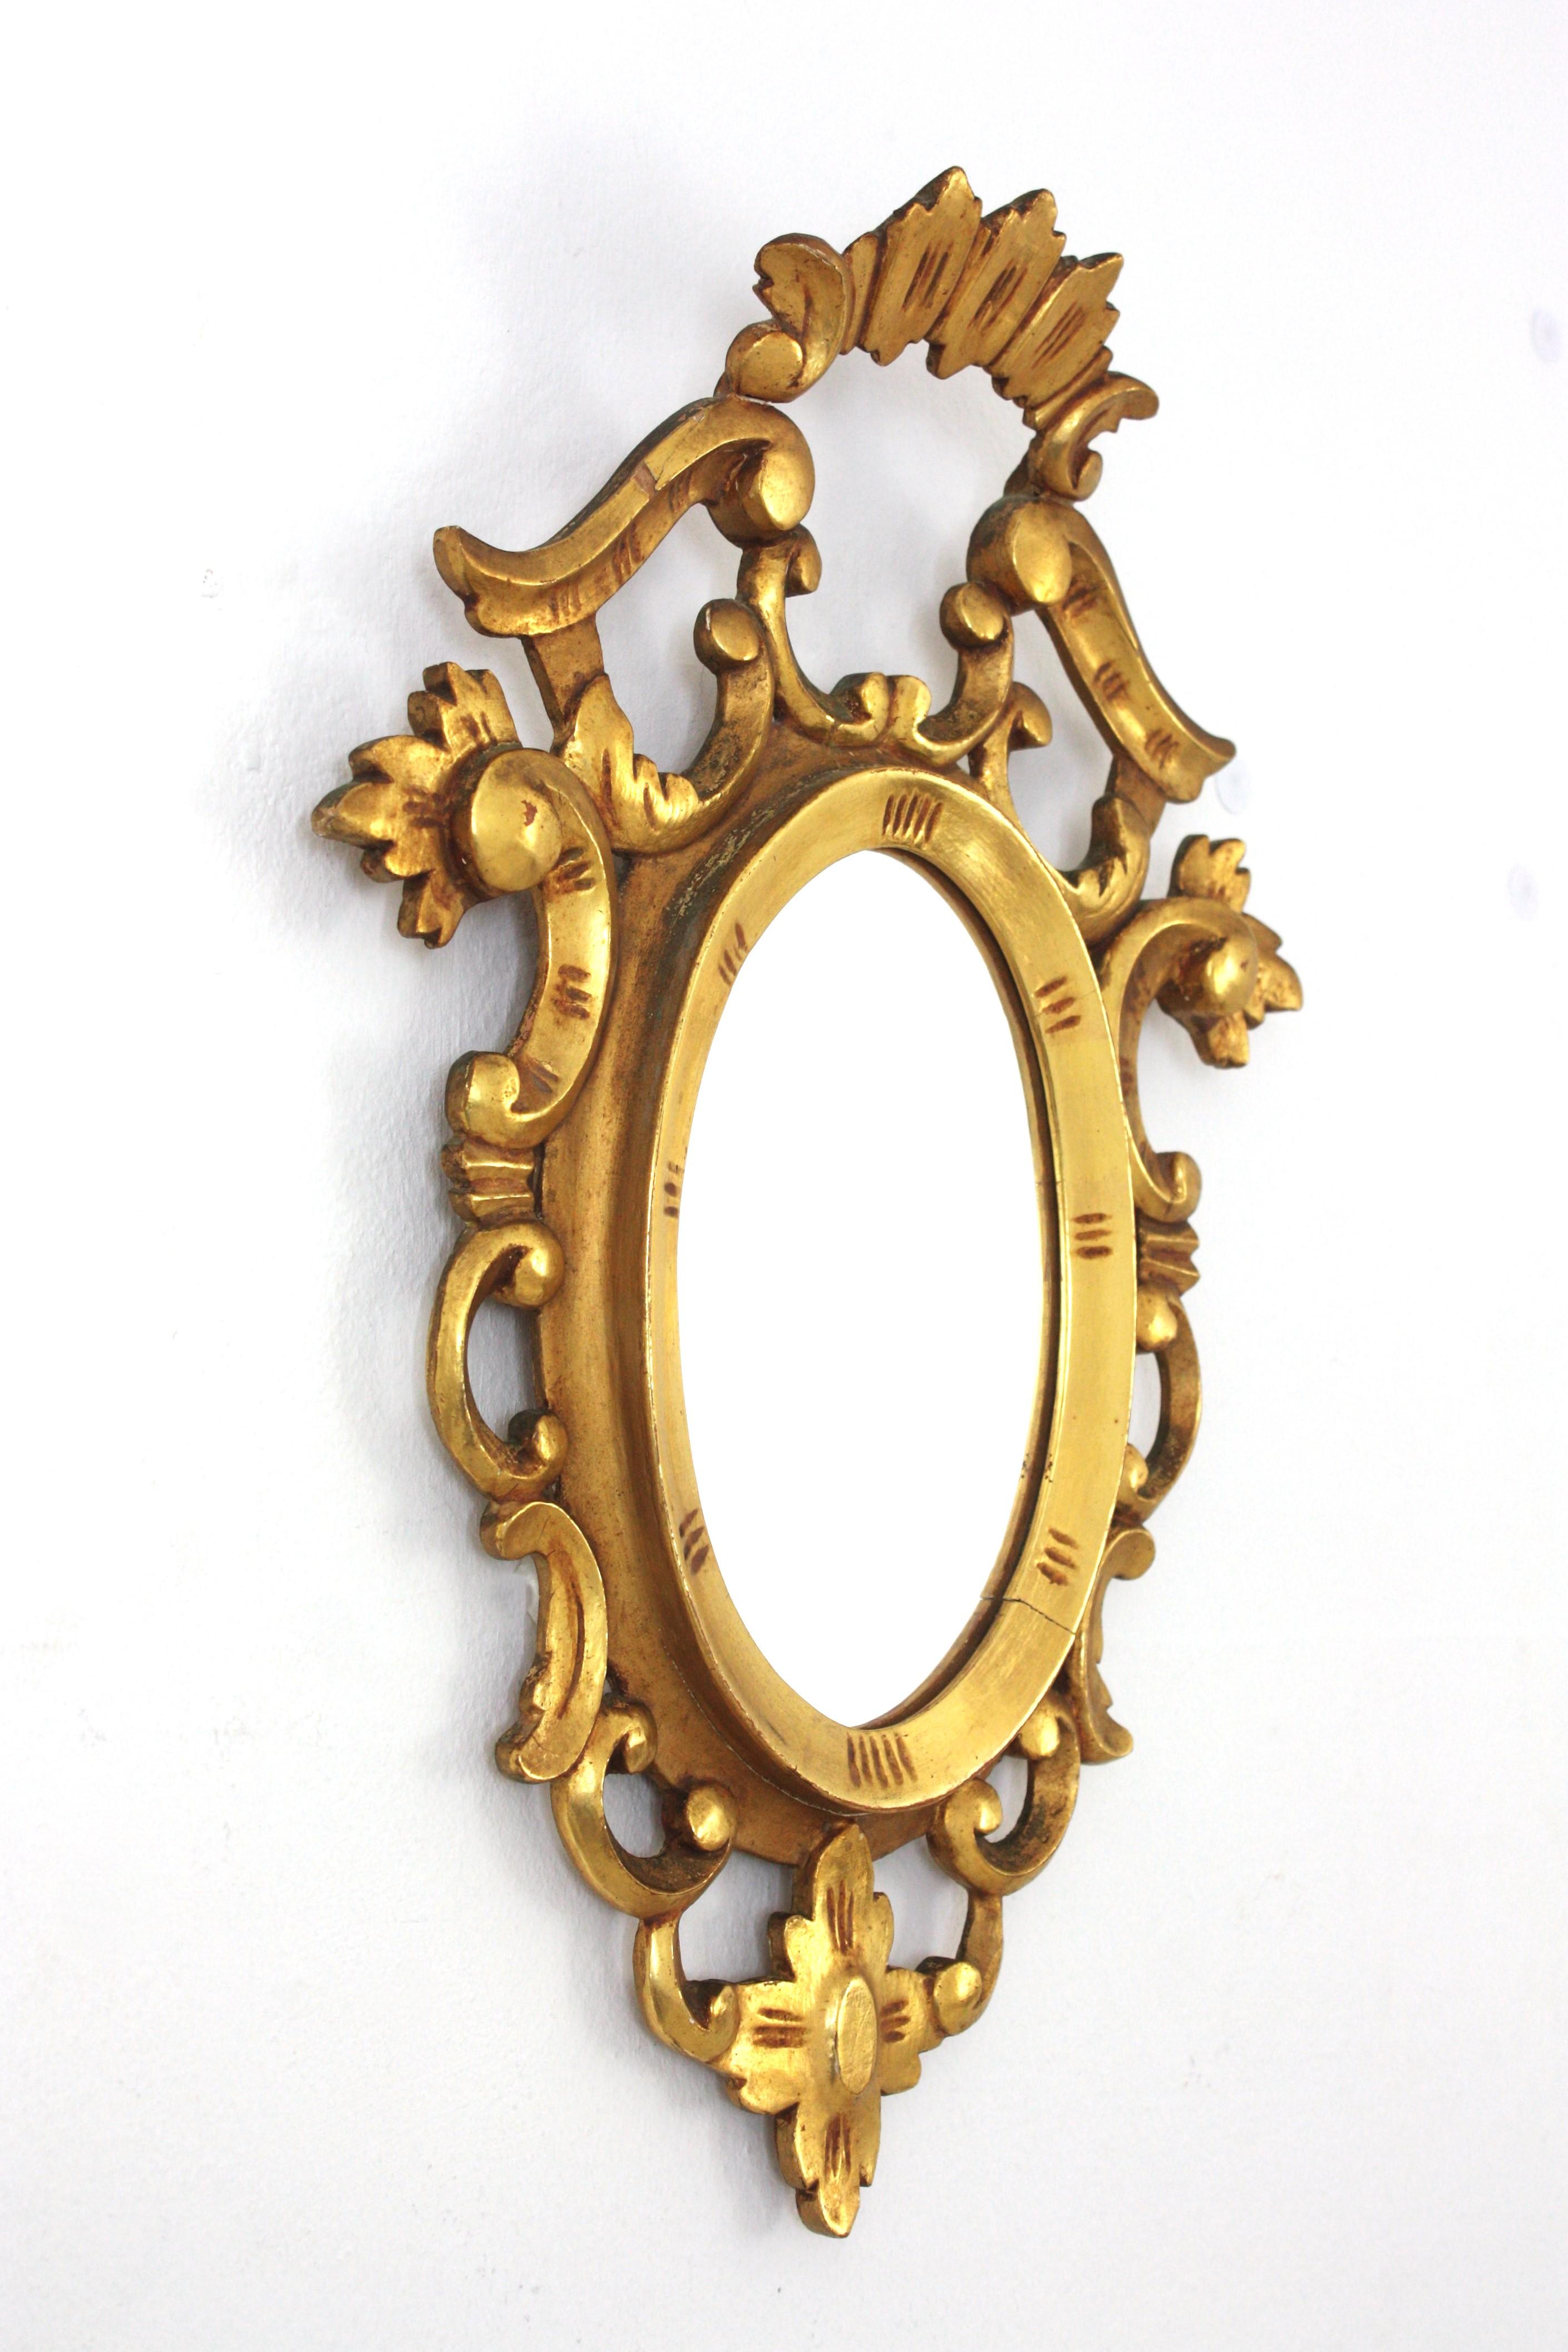 Rococo mirror, carved giltwood, Spain, 1930s.
Lovely Rococo style small carved giltwood frame surrounding an oval shaped glass. It has a beautiful crest adorning the top and naturalistic and scroll decorations at the frame. Interesting for